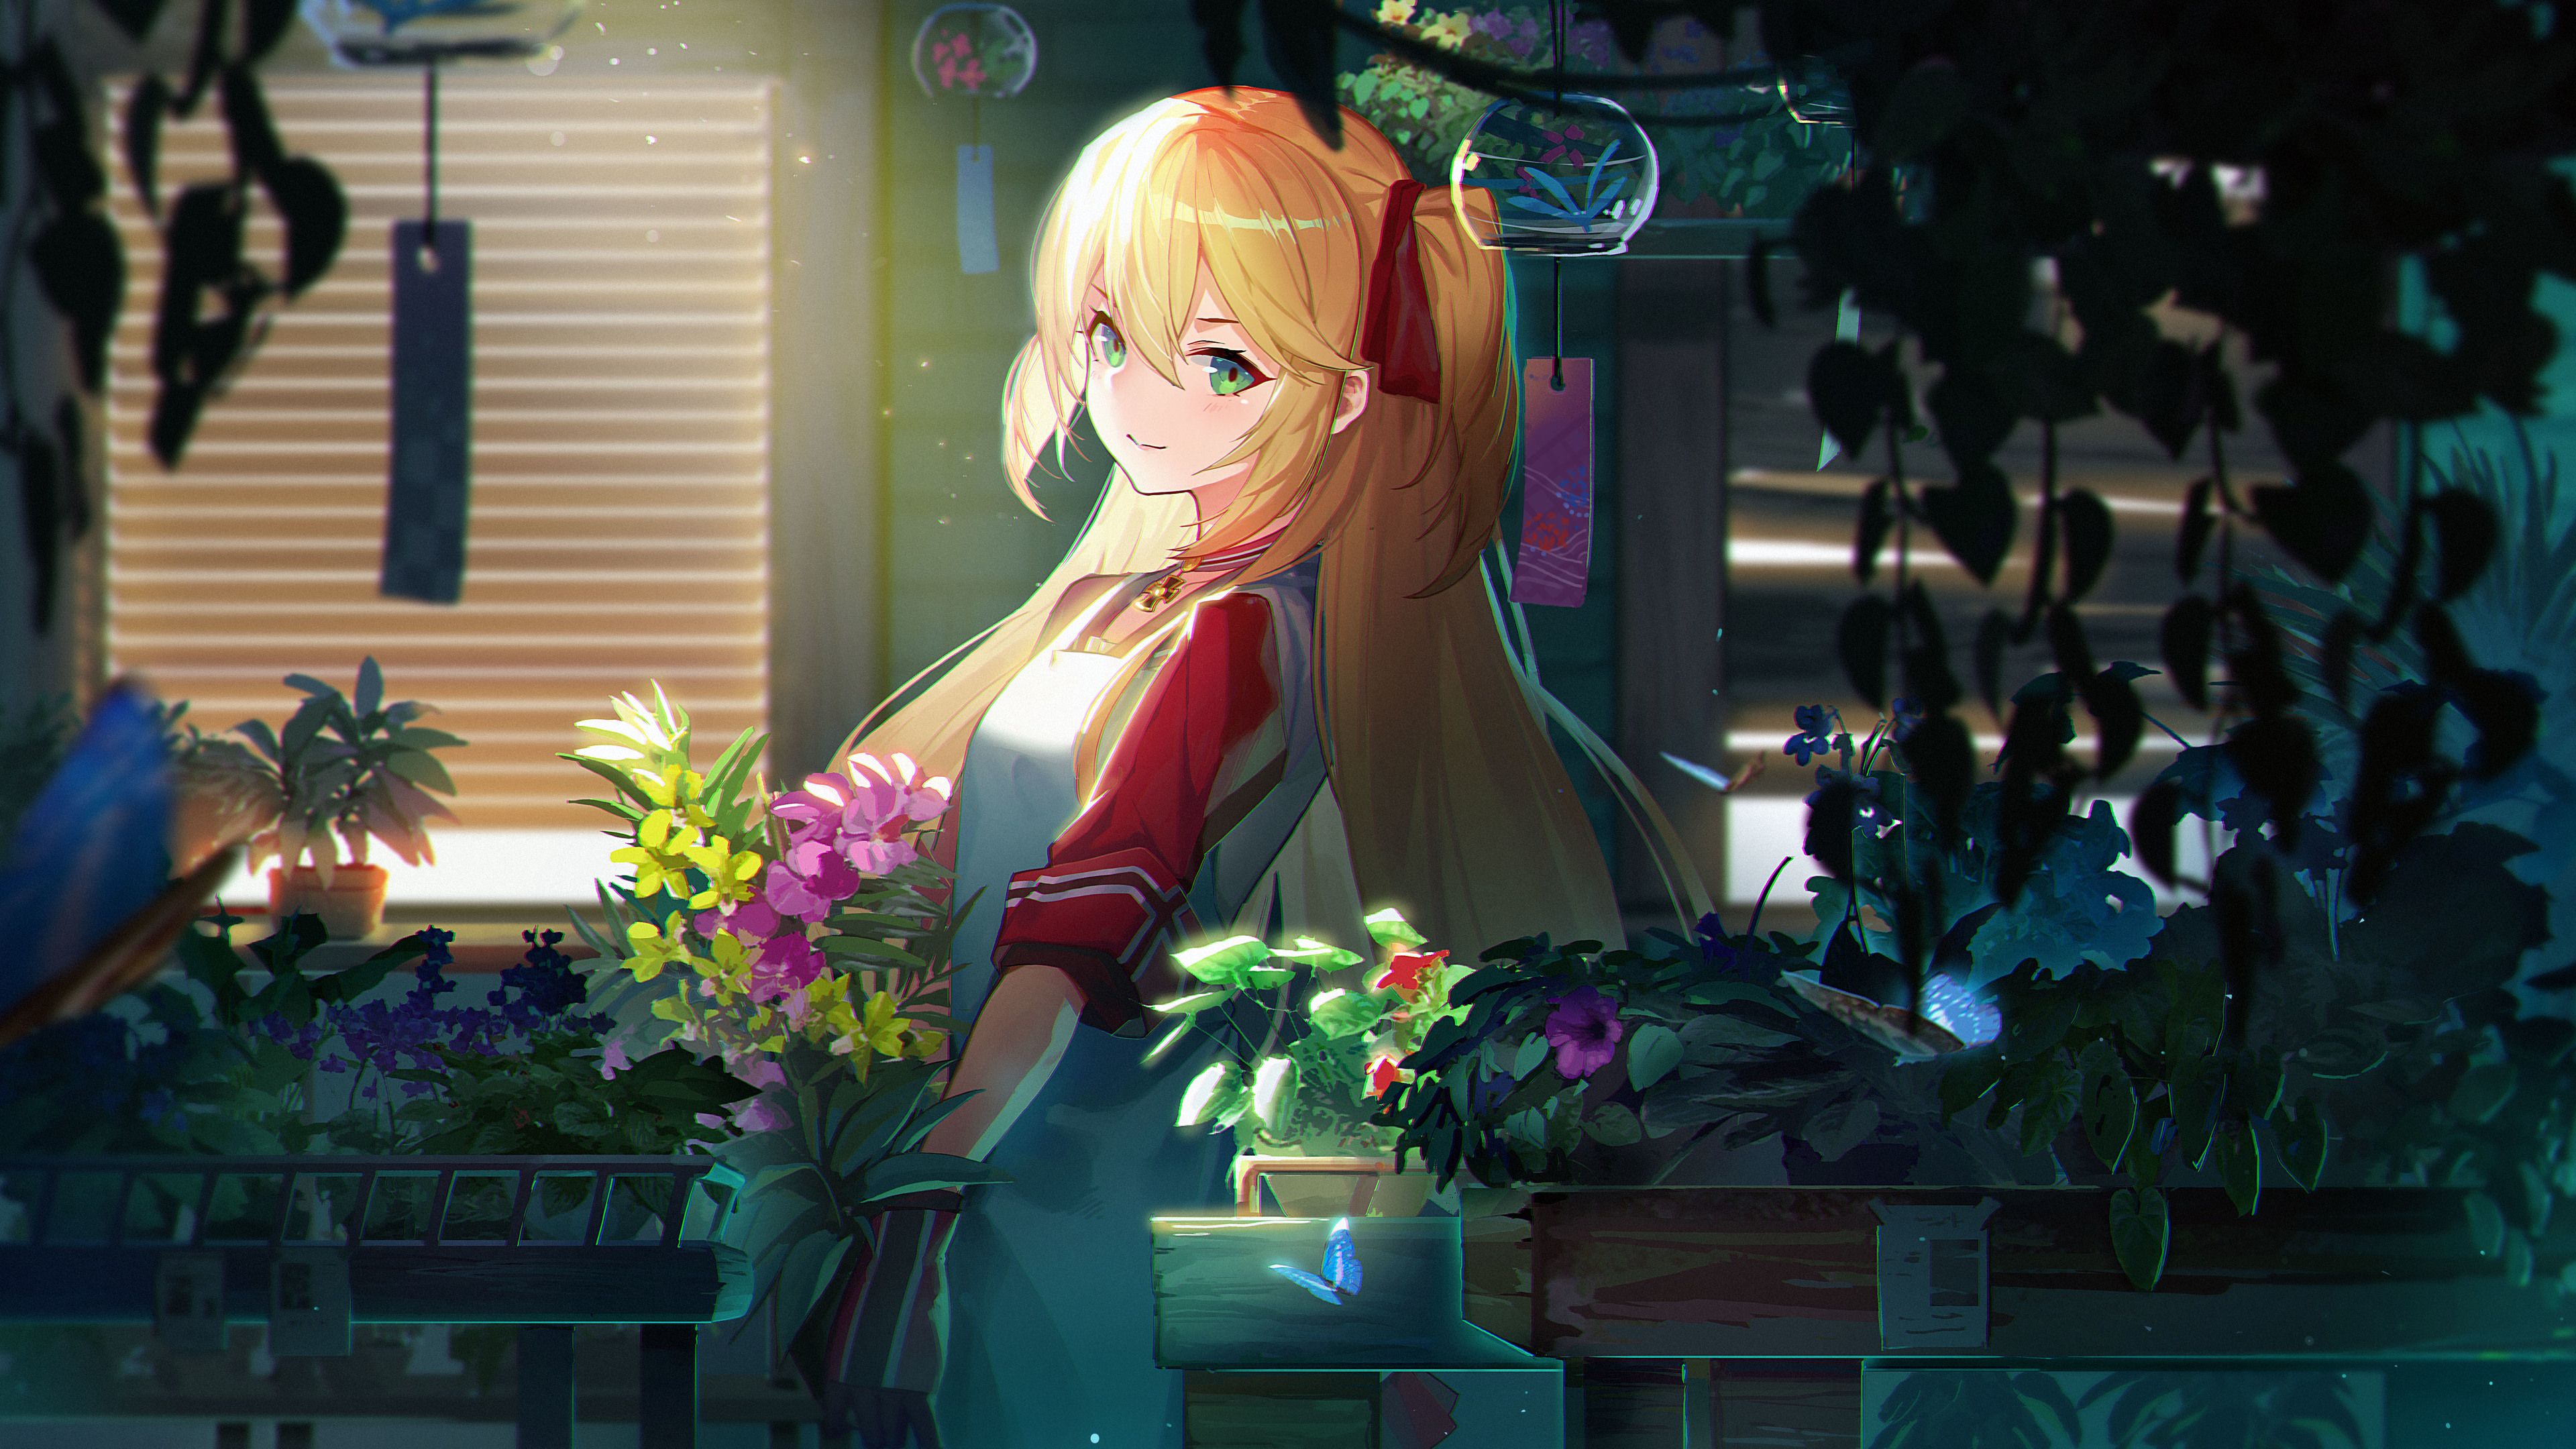 Wallpaper 4k Anime Flowers Blonde Twintails Girl Anime Girl Wallpaper, Anime Wallpaper, Artist Wallpaper, Artwork Wallpaper, Digital Art Wallpaper, Flowers Wallpaper, Hd Wallpaper